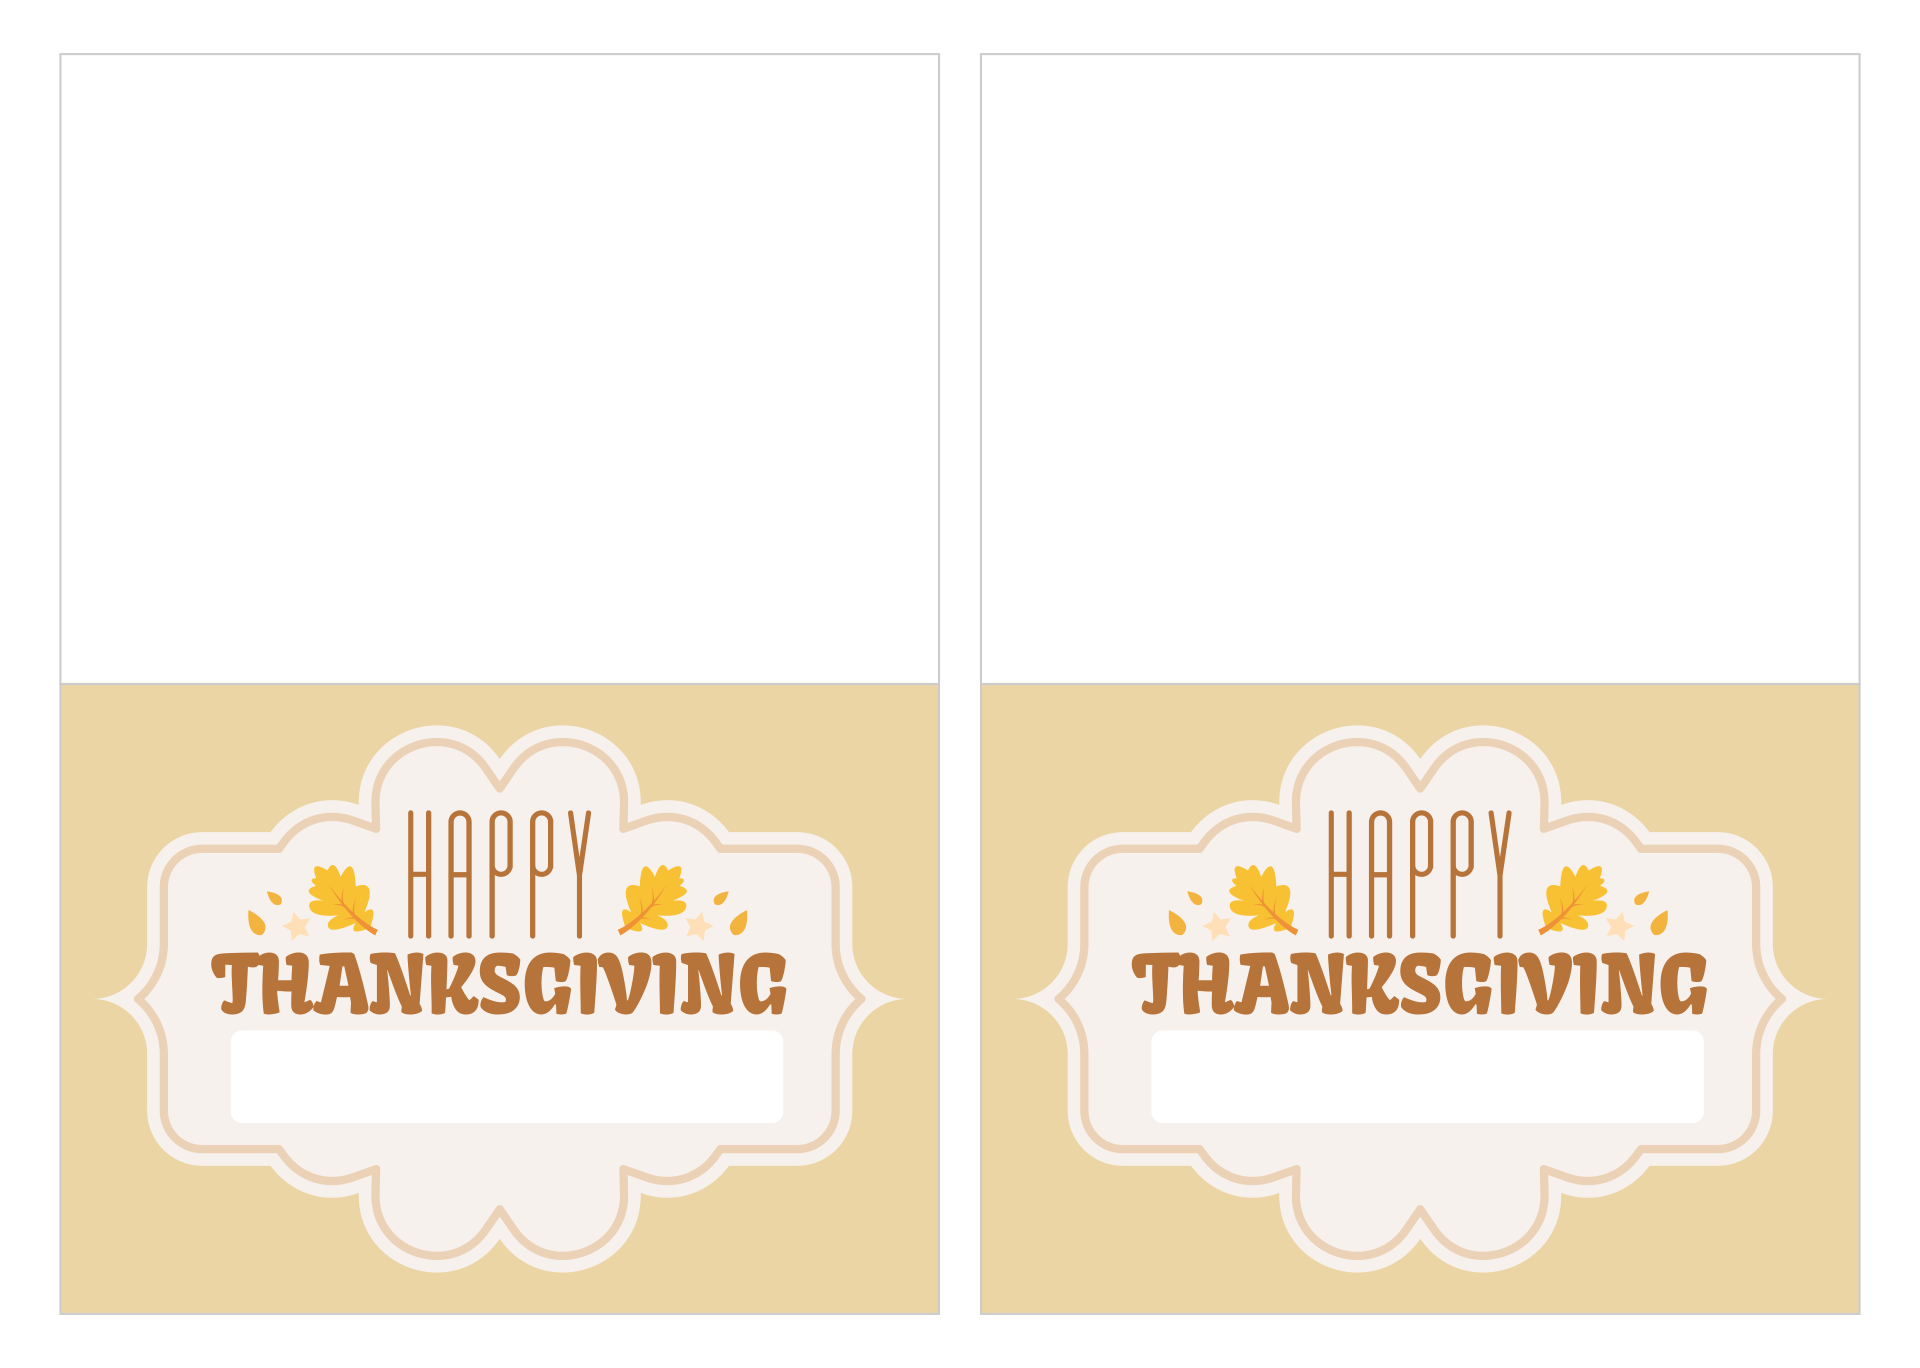 6-best-images-of-free-printable-thanksgiving-placecards-free